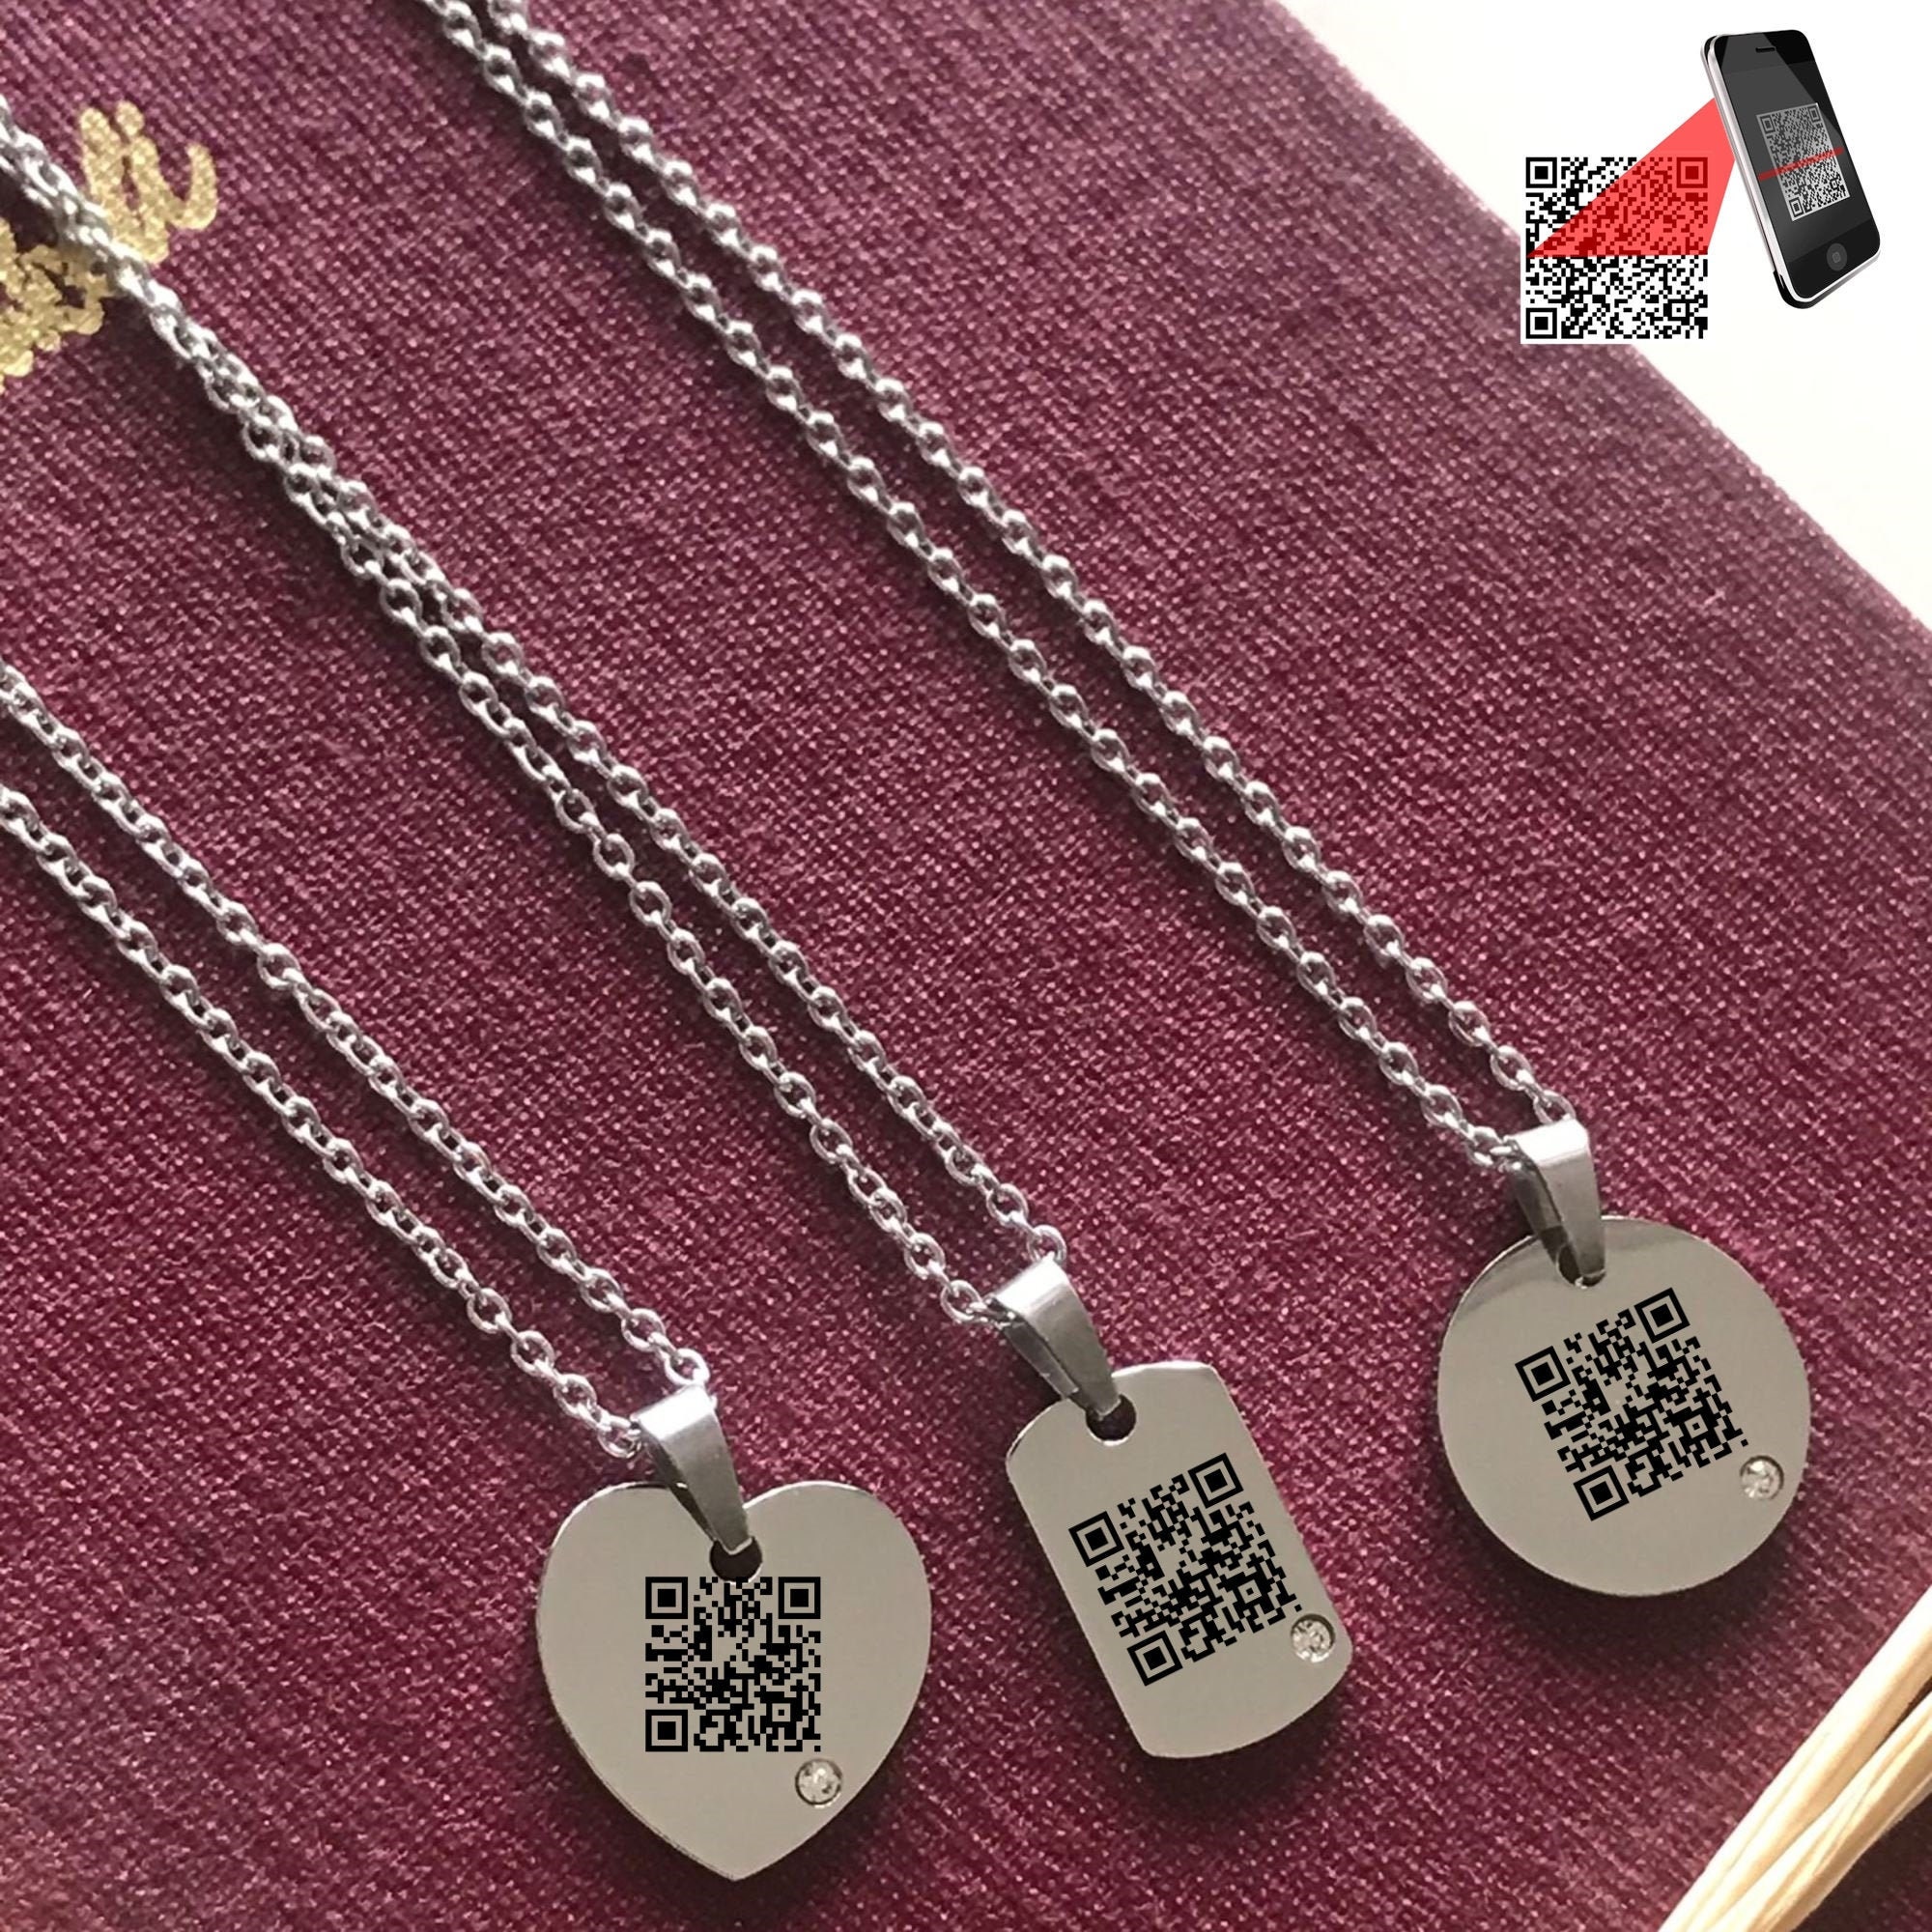 Mumbai Based Data Engineer Invents QR Code-Enabled Pendants To Aid Lost  People In Reuniting With Family